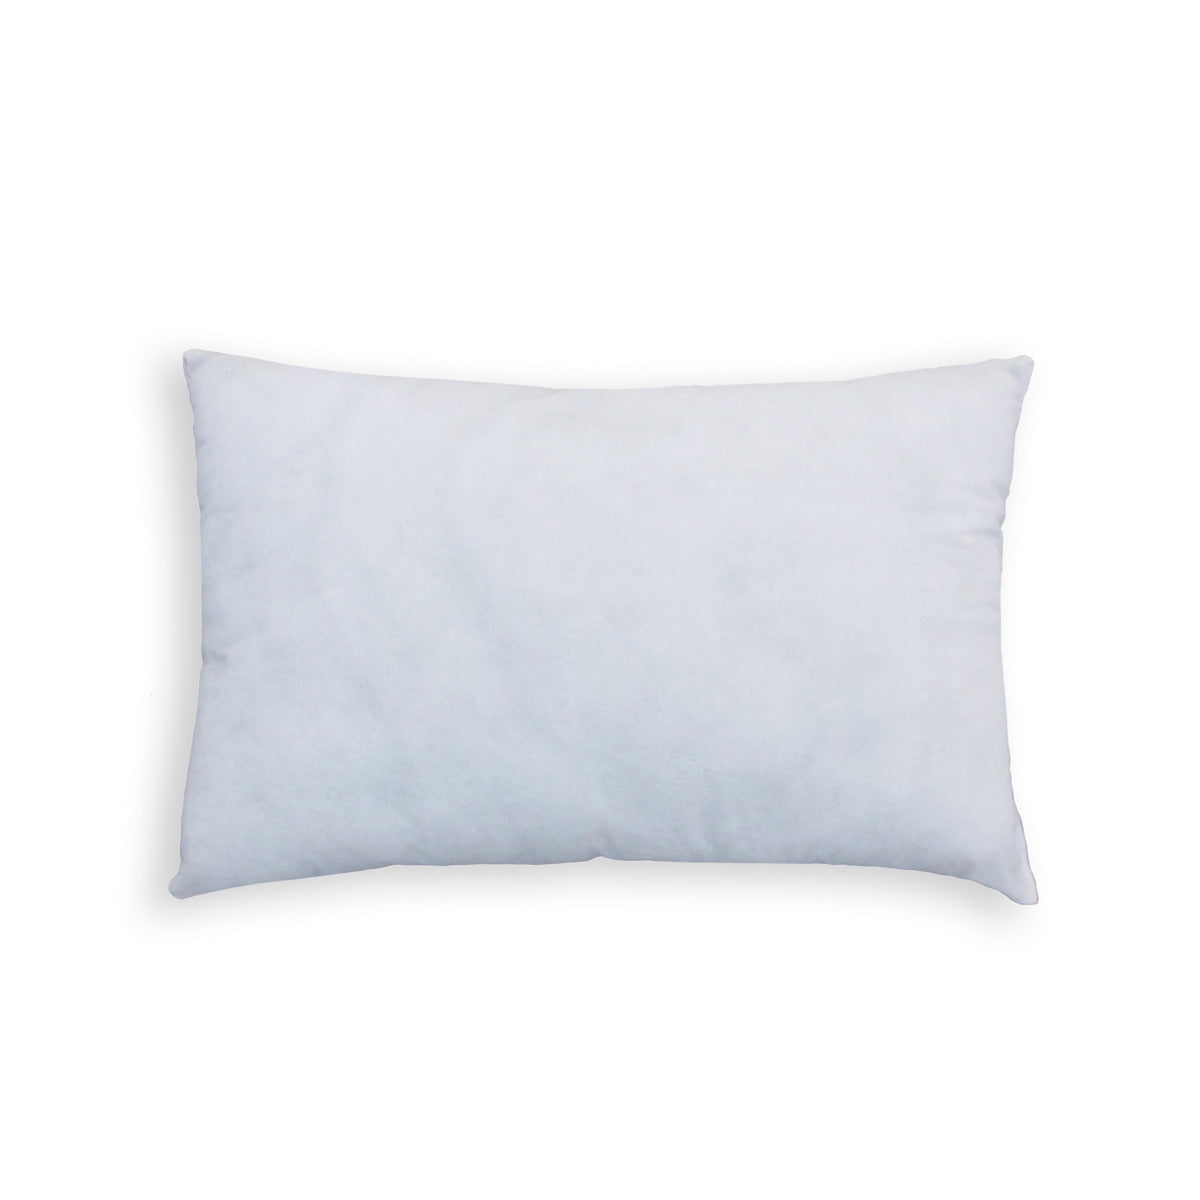 Pillow insert, rectangular shapes, sizes available